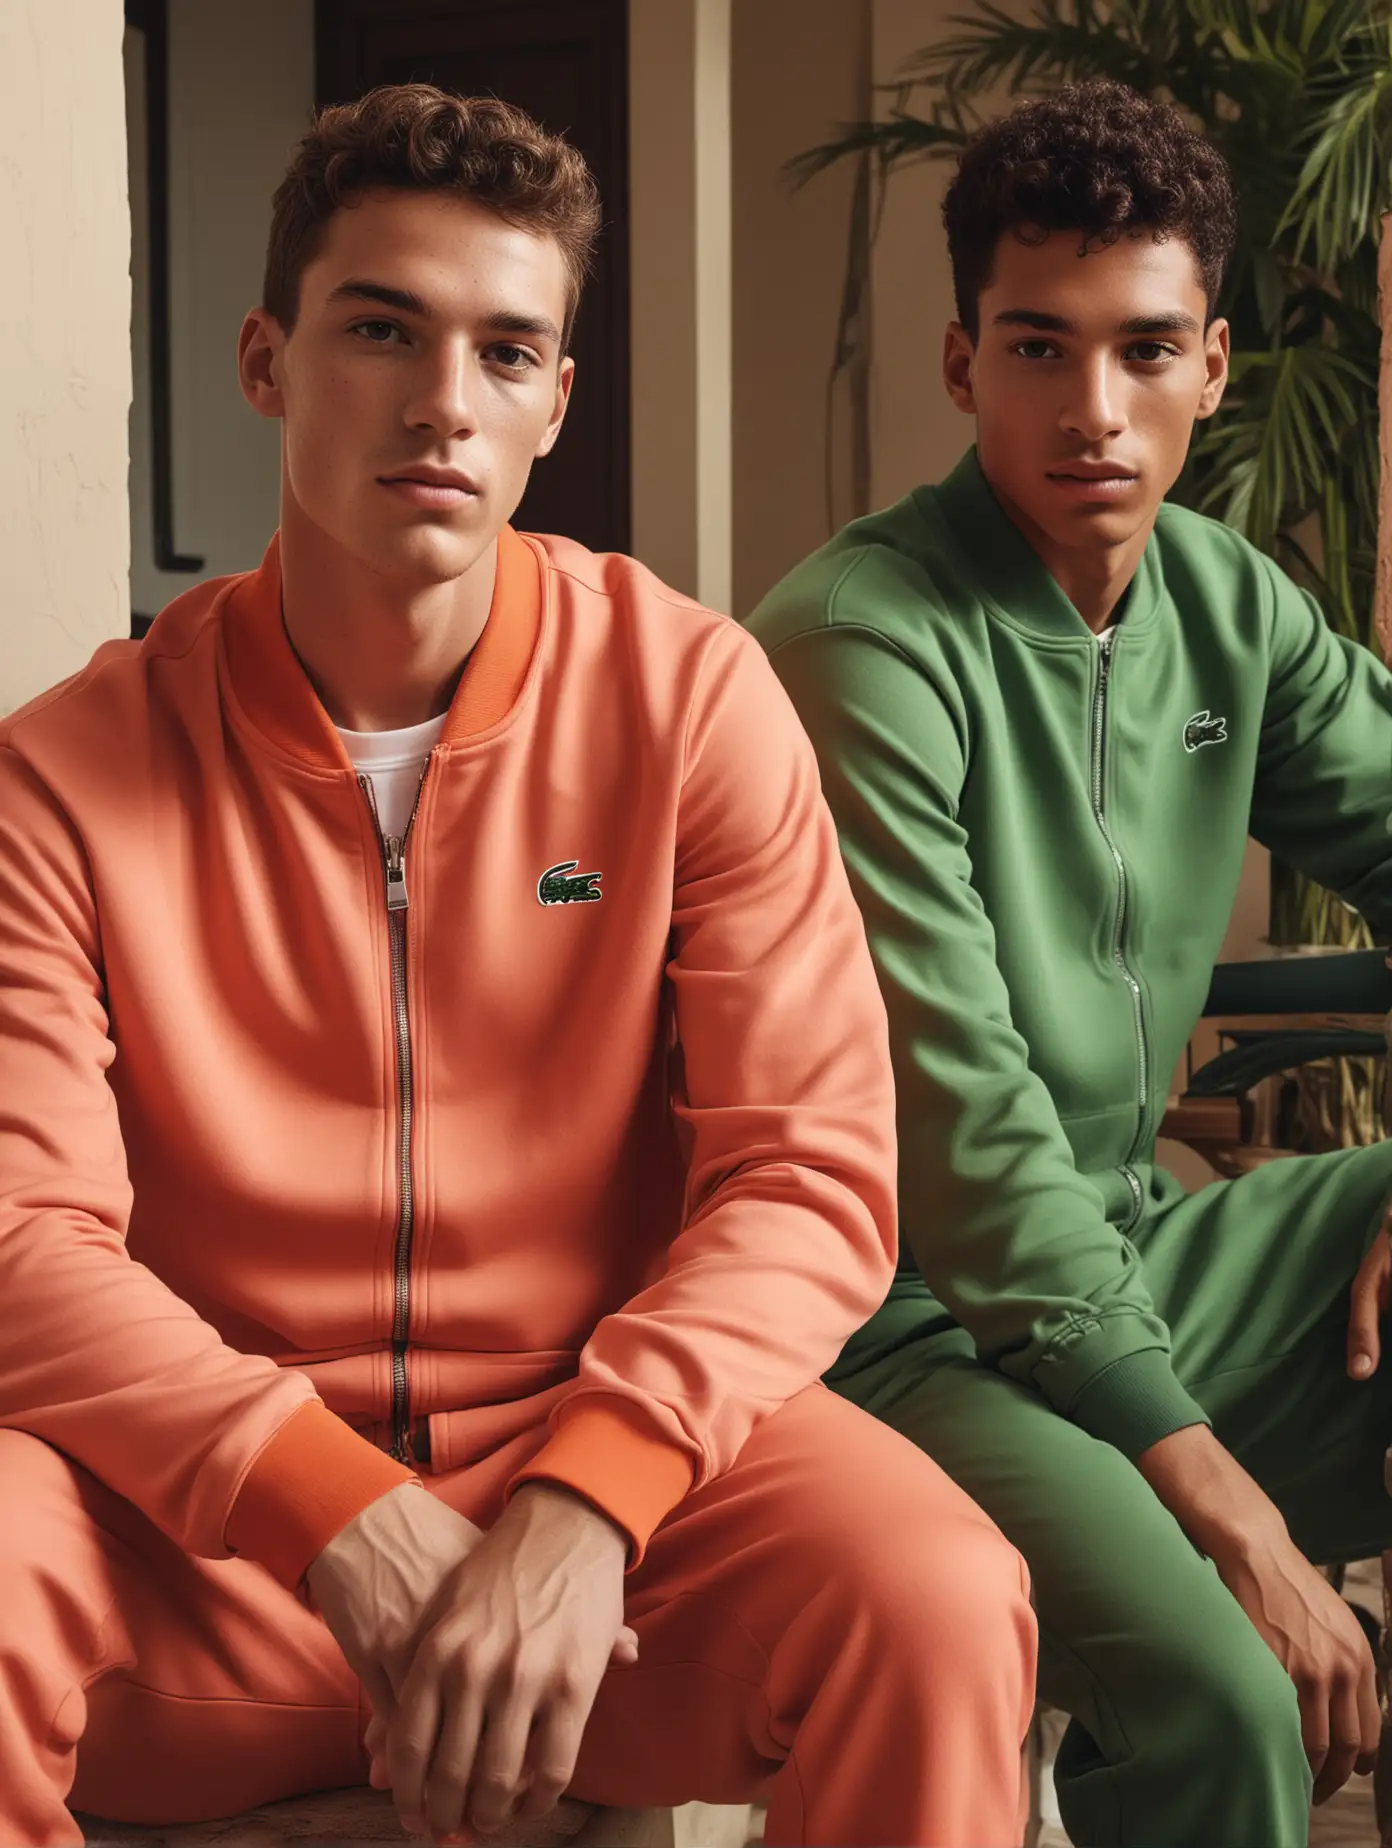 Fashion Photo Shoot with Two Male Models in Colorful Lacoste Tracksuits